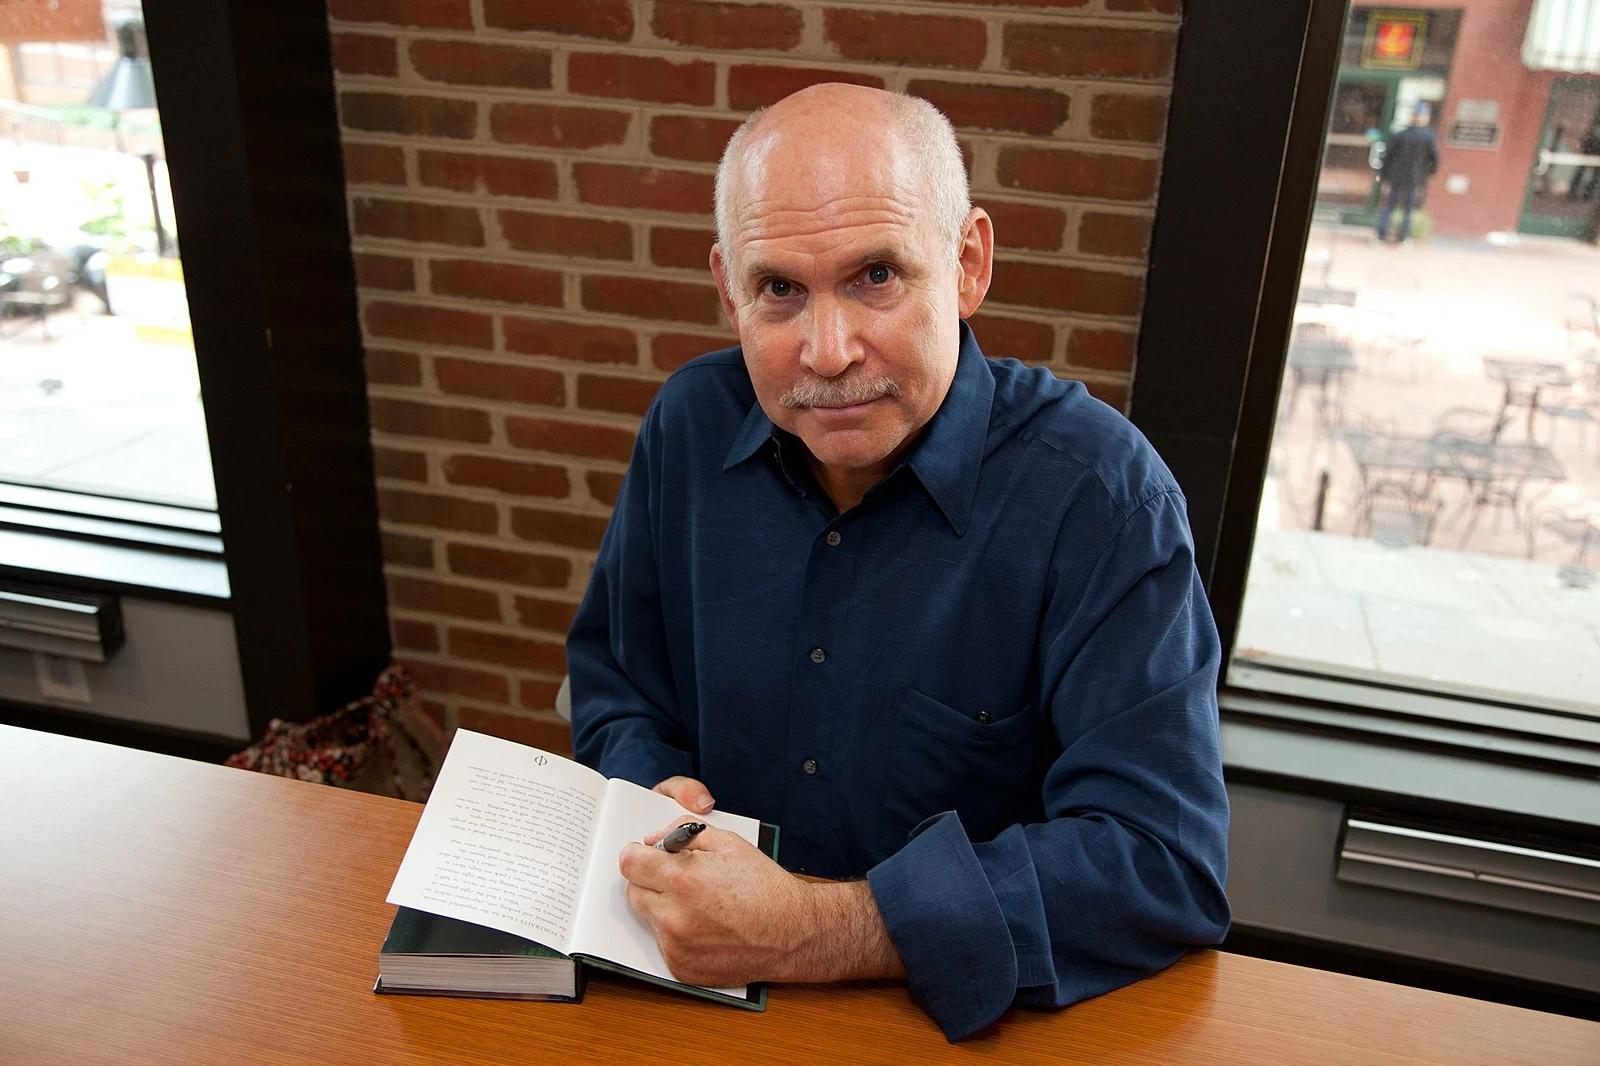 Portrait of Steve McCurry at a book signing (2011).